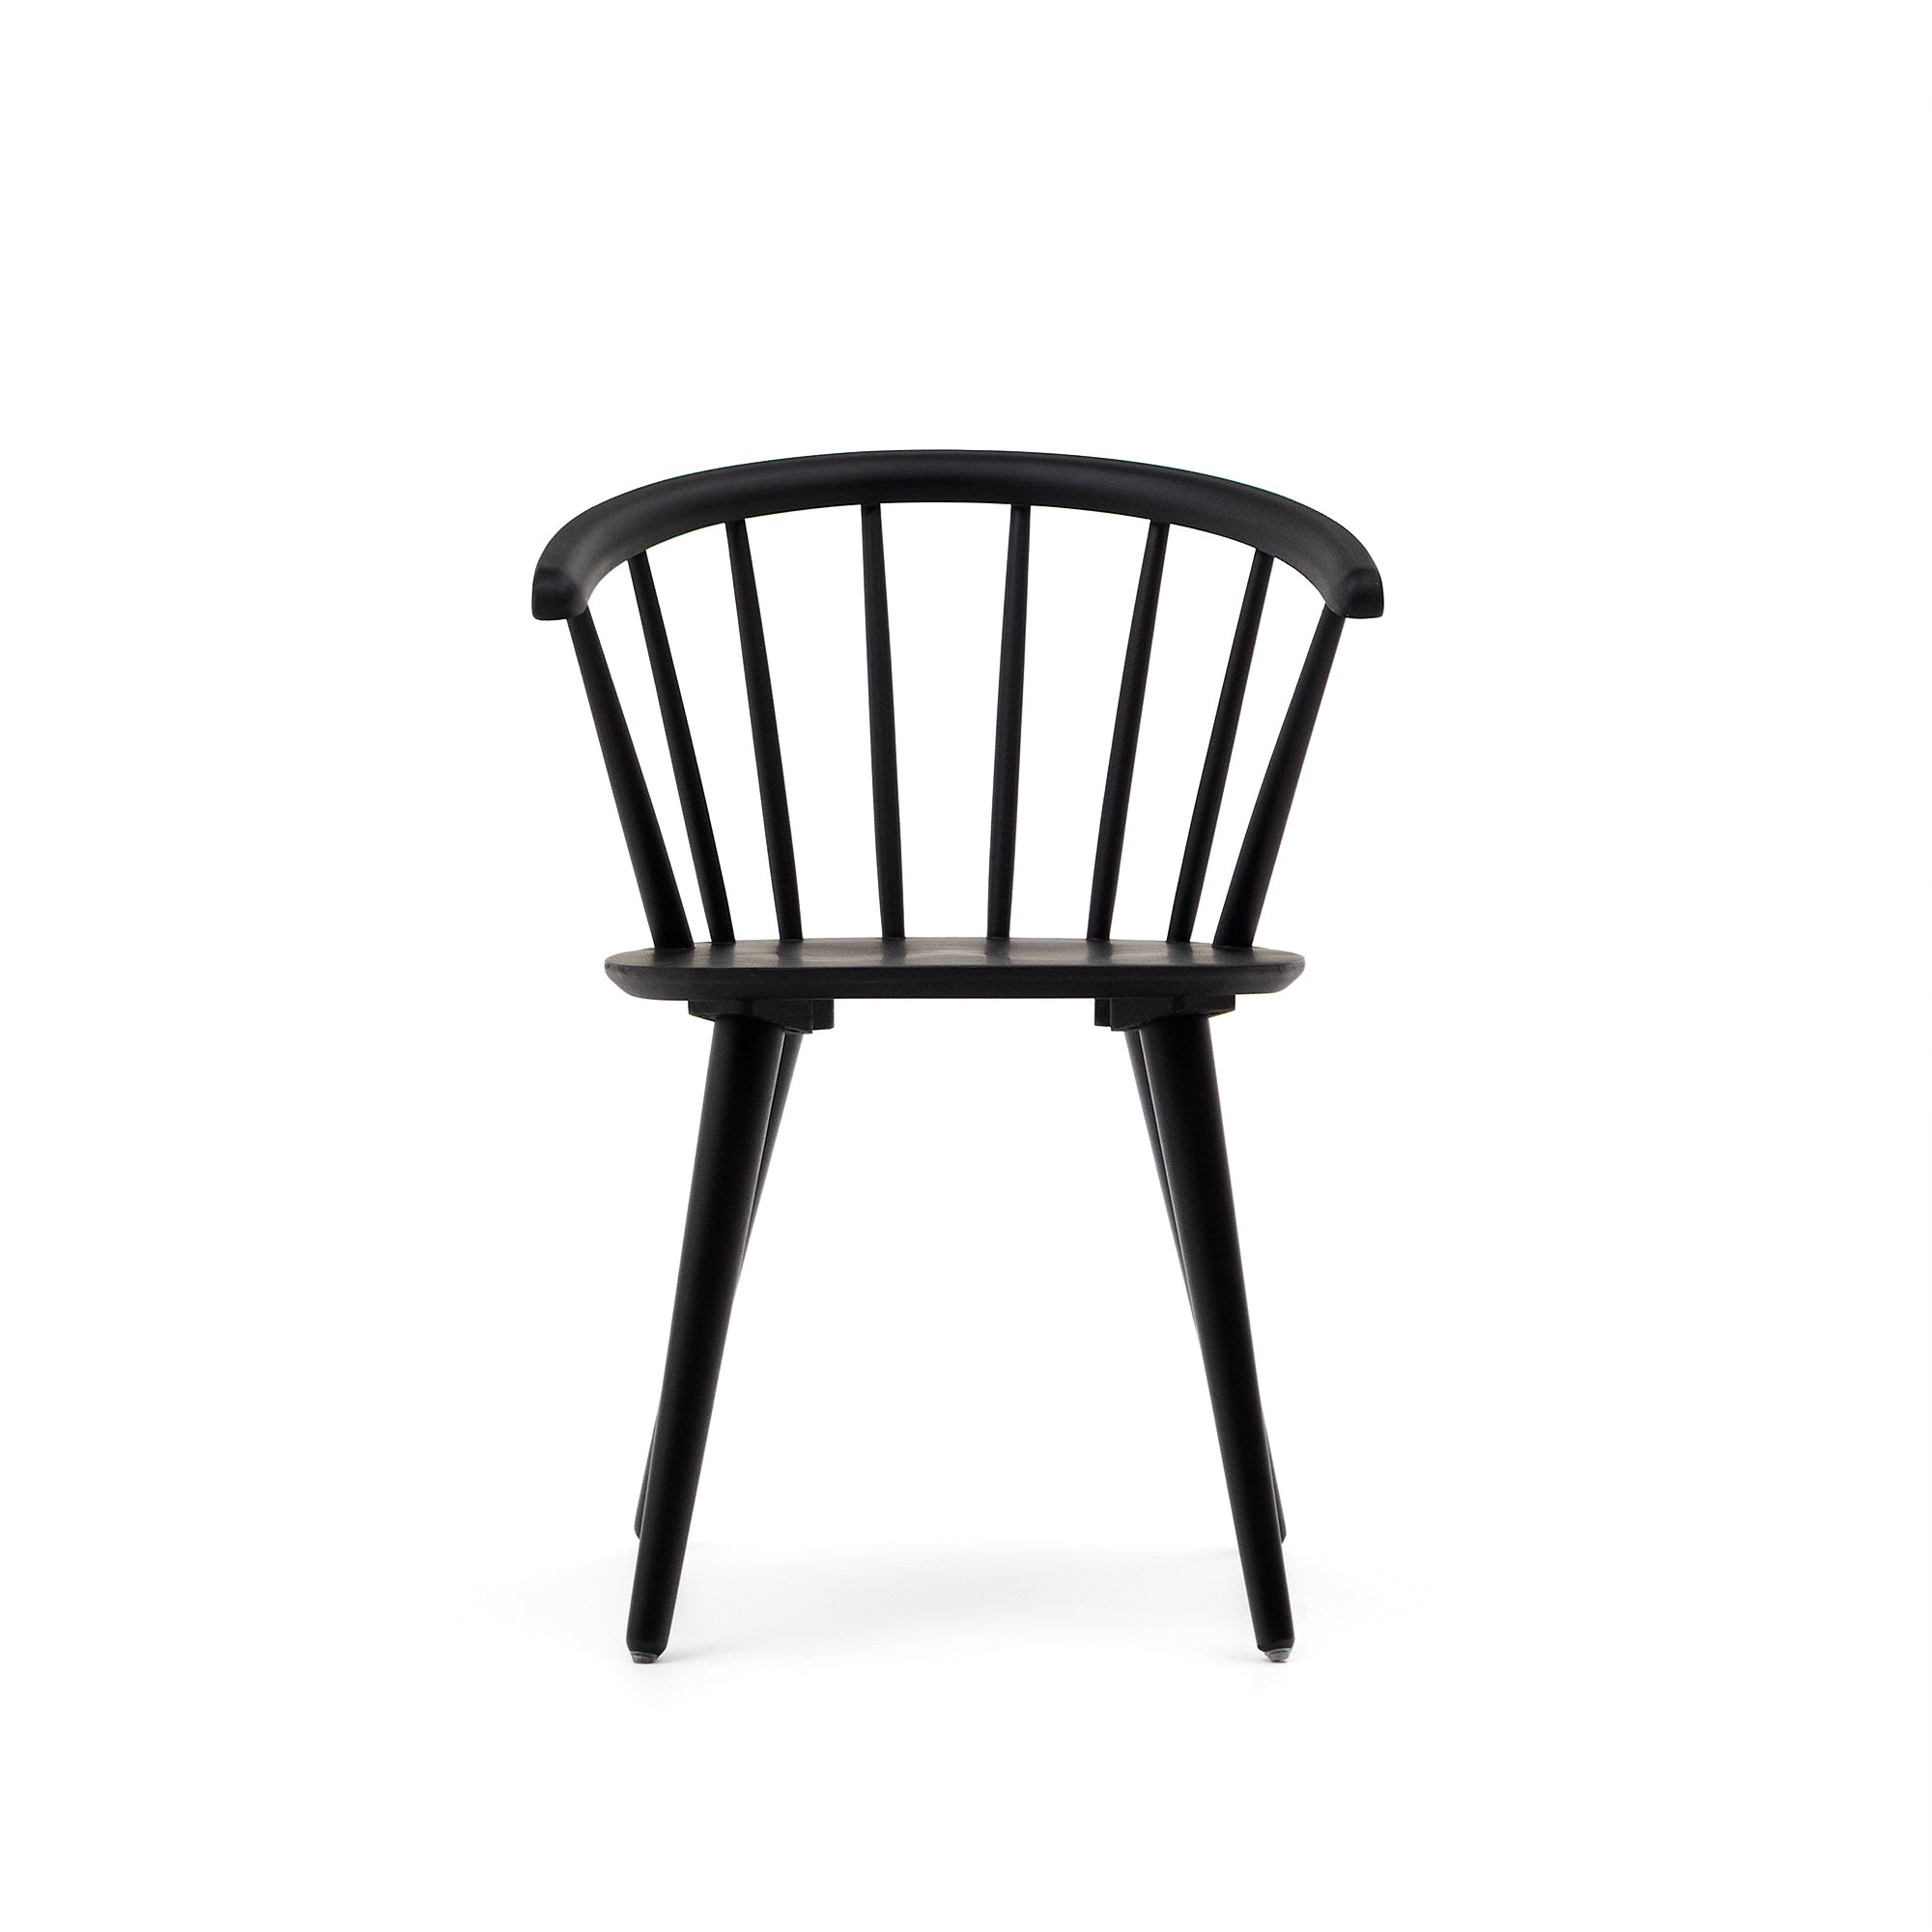 Trise MDF and solid rubber wood chair with black lacquer